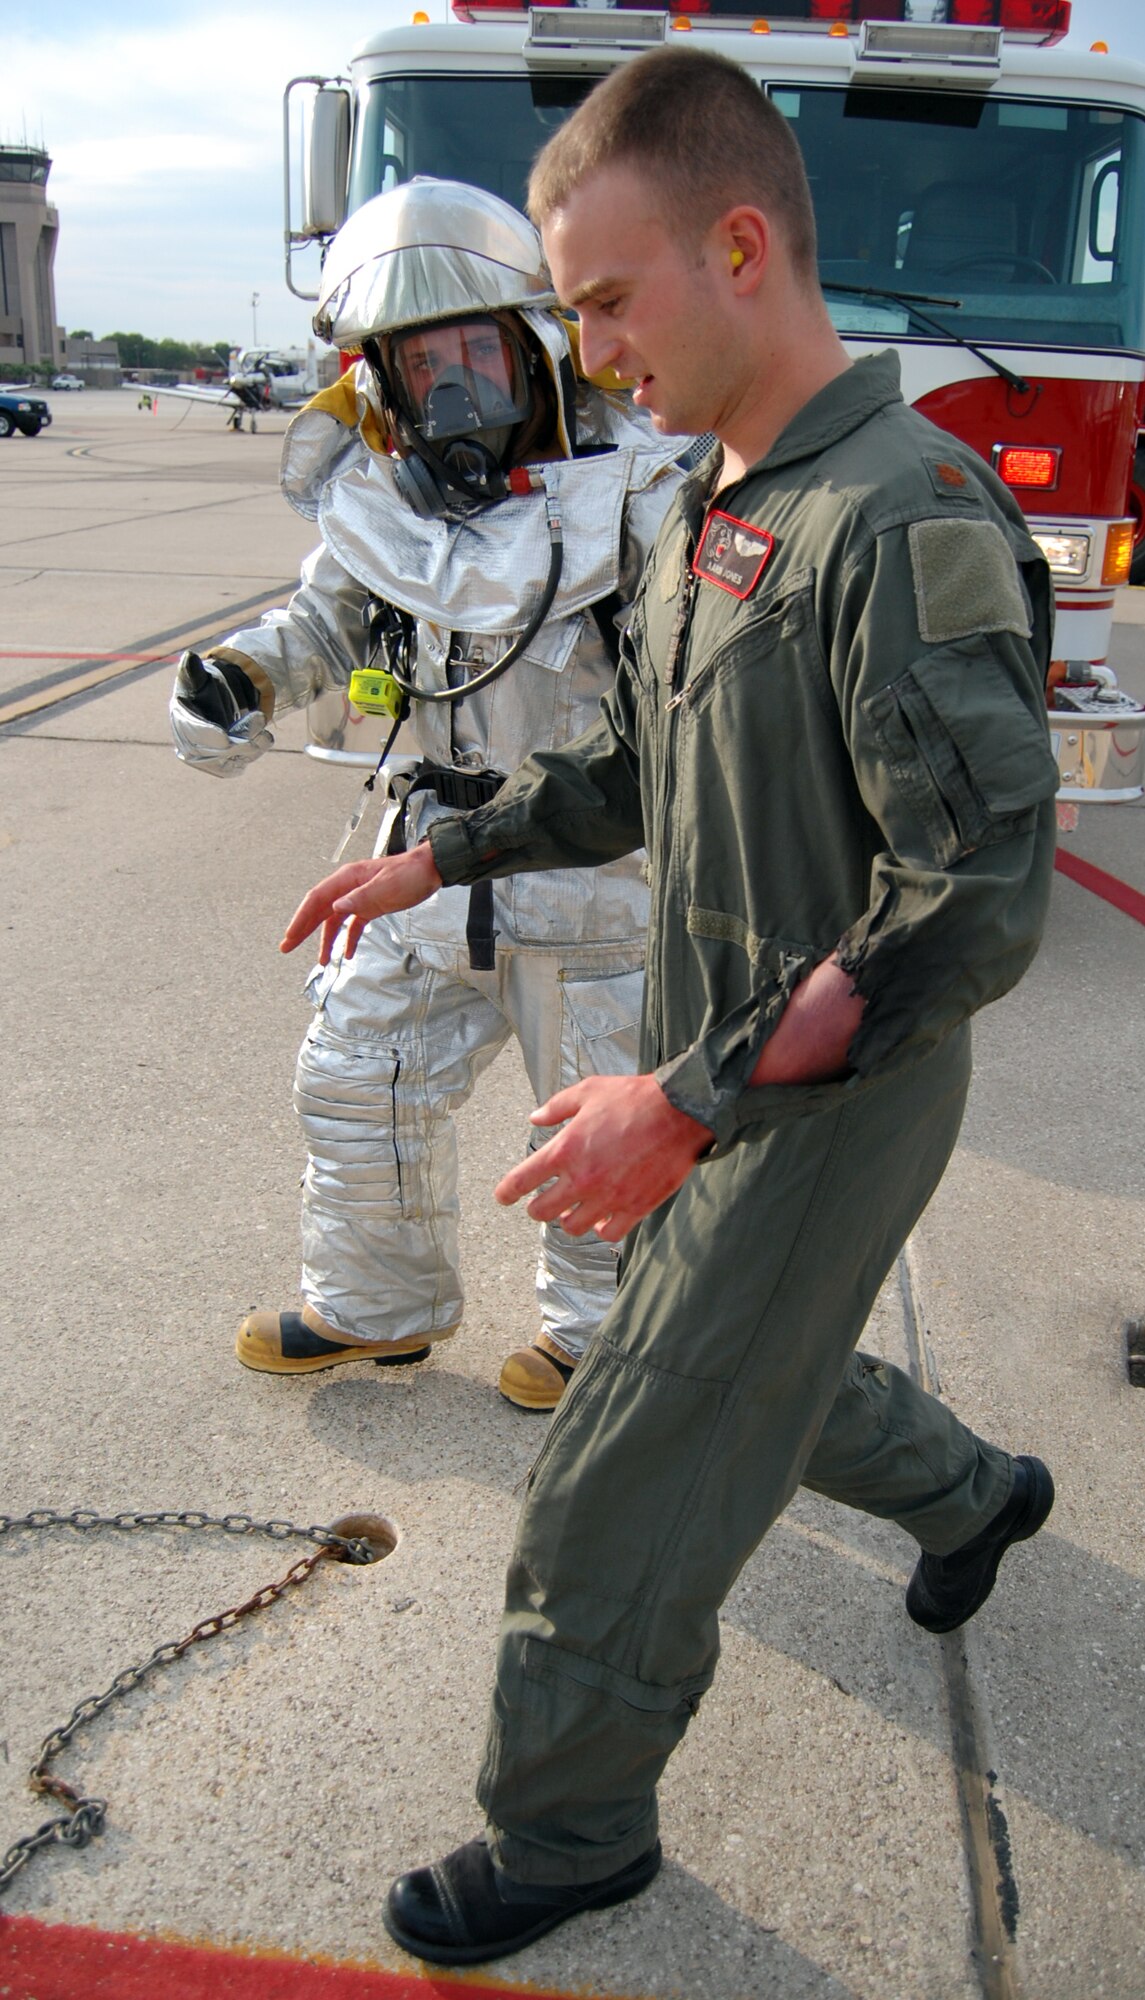 LAUGHLIN AIR FORCE BASE, Texas – A firefighter from the 47th Installation Support Squadron assists a simulated burn victim in finding his way to a medical treatment area during an exercise on the flight line here Sept. 24.  The exercise involved several victims made up with detailed burns and other wounds, called moulage, which assists responders in identifying simulated injuries.  (U.S. Air Force photo by Staff Sgt Austin M. May)